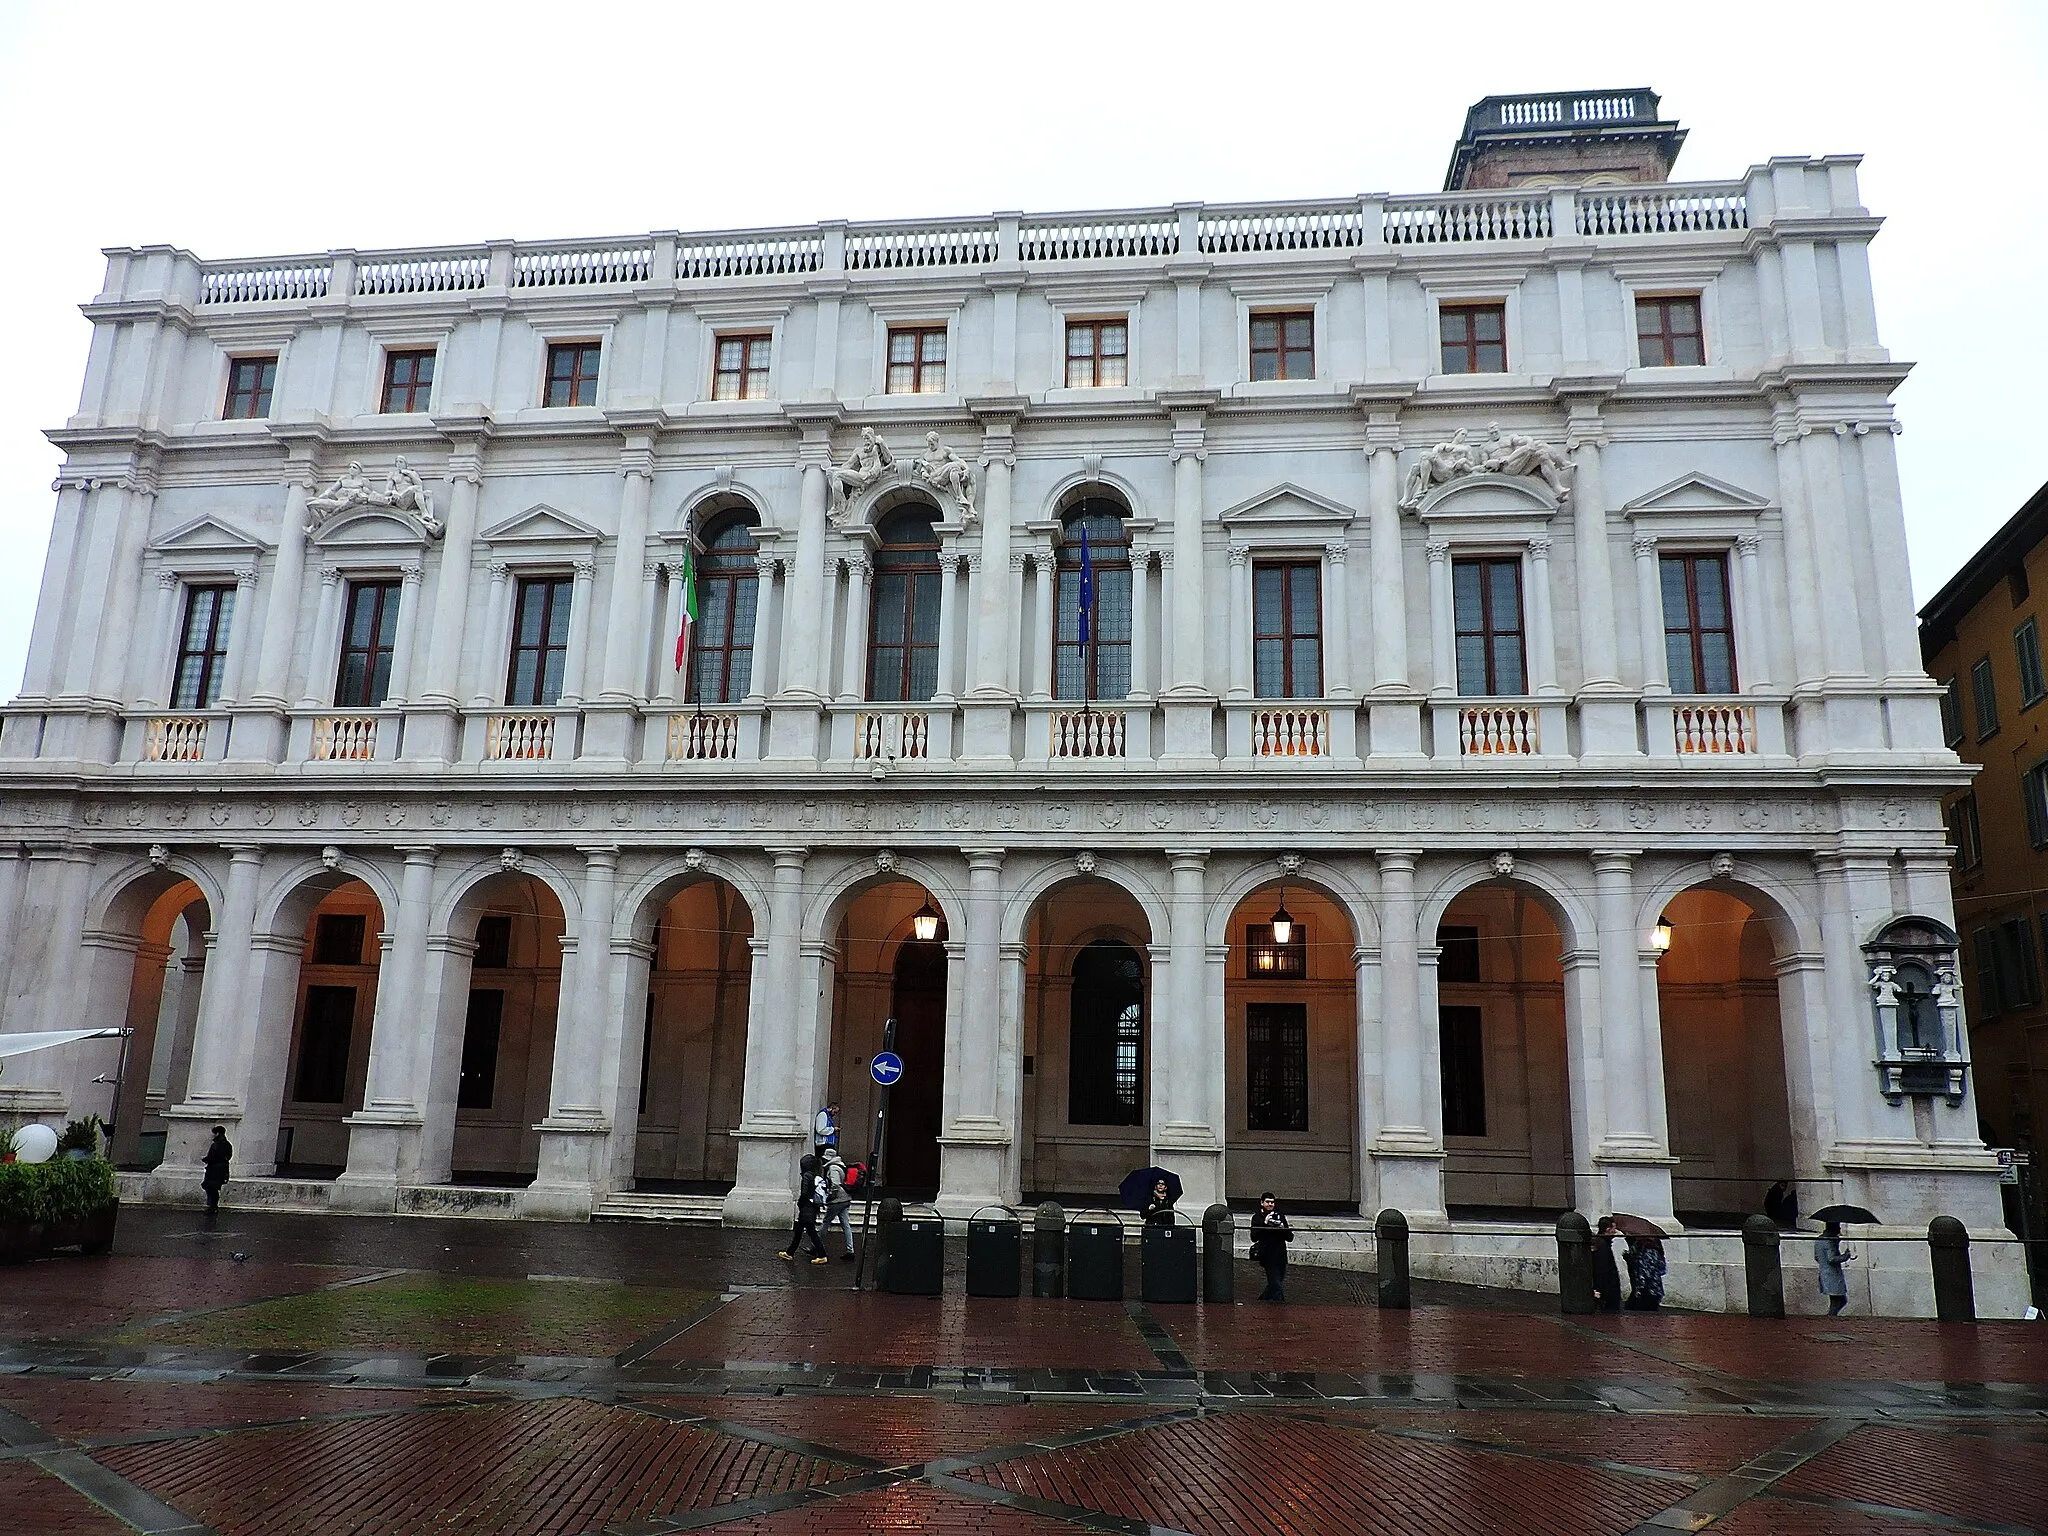 Photo showing: Palazzo Nuovo (“New Palace”) is like a theatre wing located in via Colleoni, overlooking the Piazza Vecchia. It’s called like that in contrast with Palazzo Vecchio (“Old Palace”) aka Palazzo della Ragione, standing in the opposite side of the square.
It took three centuries to build it: the works started in 1604 and ended in 1928. The Palace has served as Bergamo’s Town Hall for three hundred years, till 1873.
Since 1928, one of its rooms has been hosting one of Italy’s most renowned libraries, the “Civica Angelo Mai”, safeguarding parchments, incunabula, codices and precious music sheets.

Source: www.visitbergamo.net